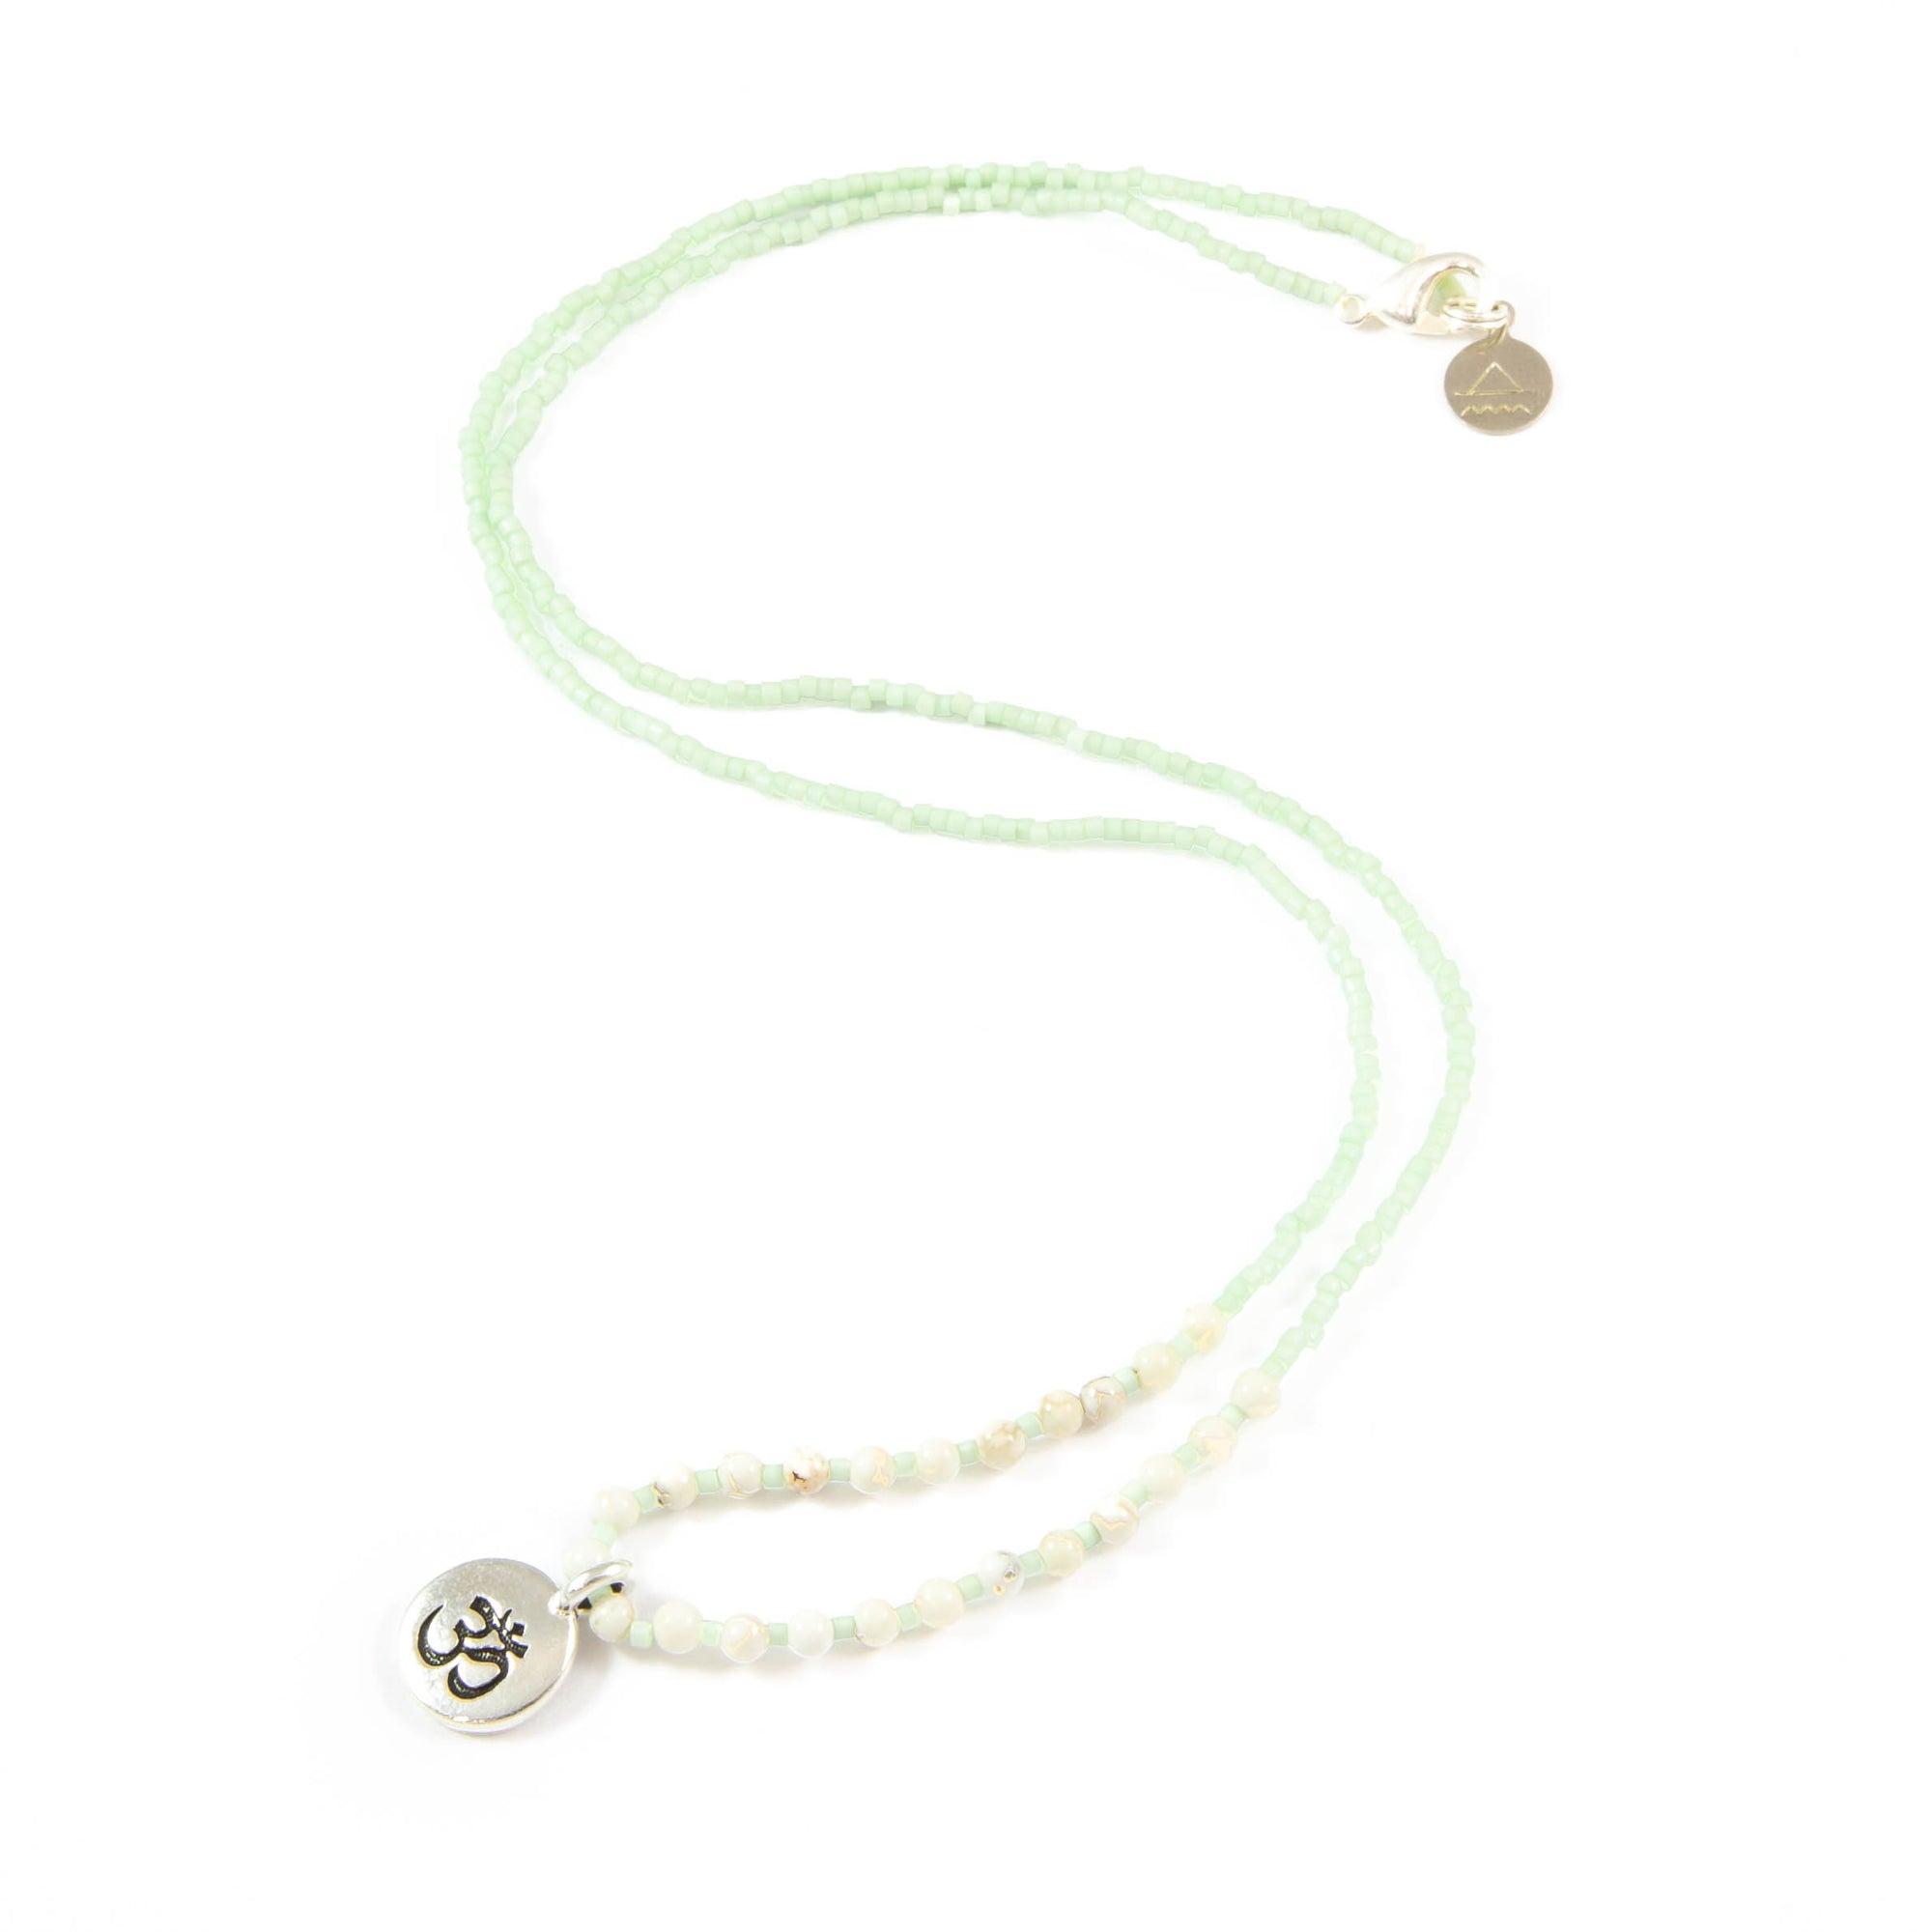 Soft Mint w/ White Turquoise Stone Om Charm Necklace in Silver